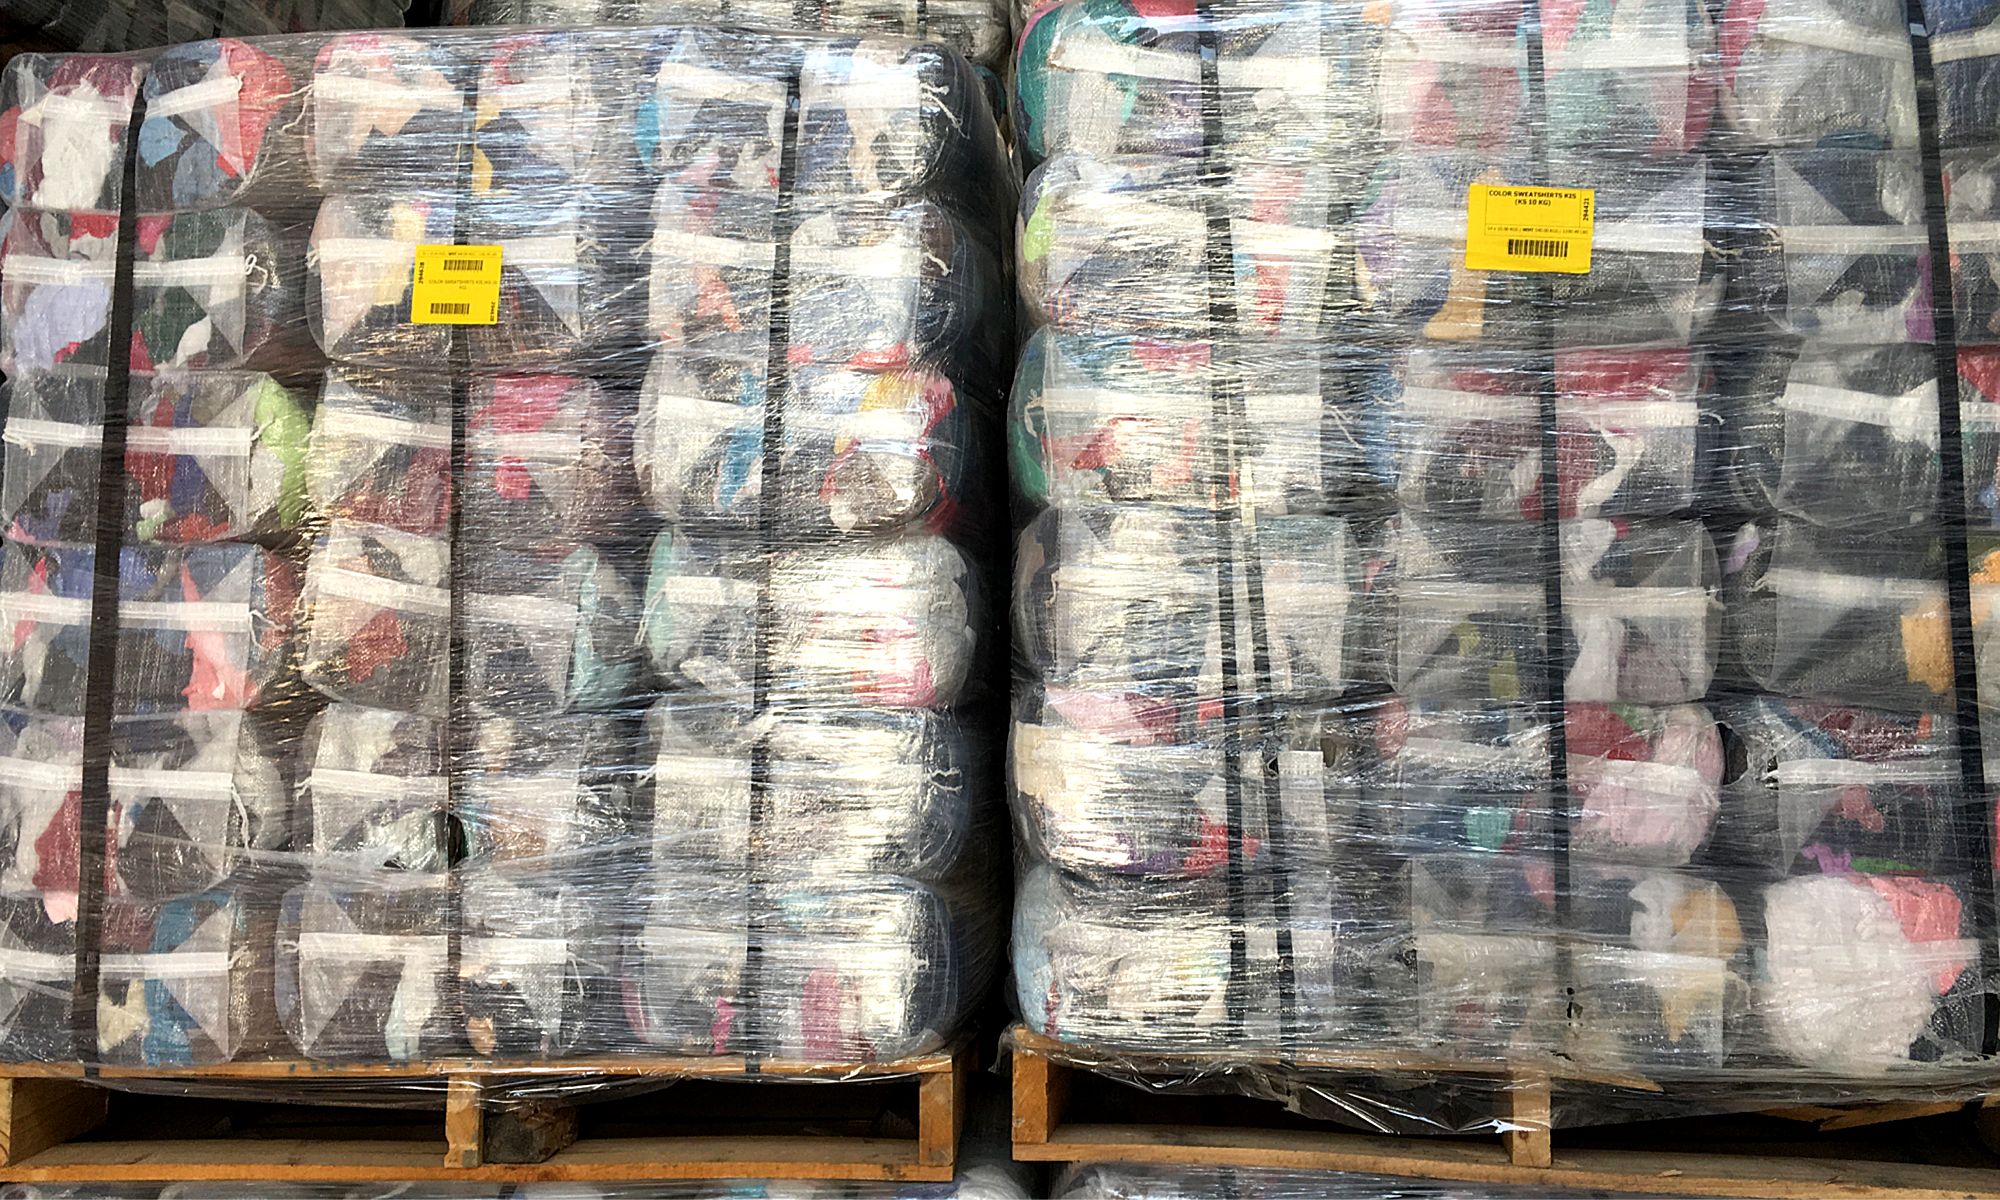 Coloured rags in the warehouse at KKC, Janitorial Supplies &  Health & Safety Products, Co. Kildare, Ireland